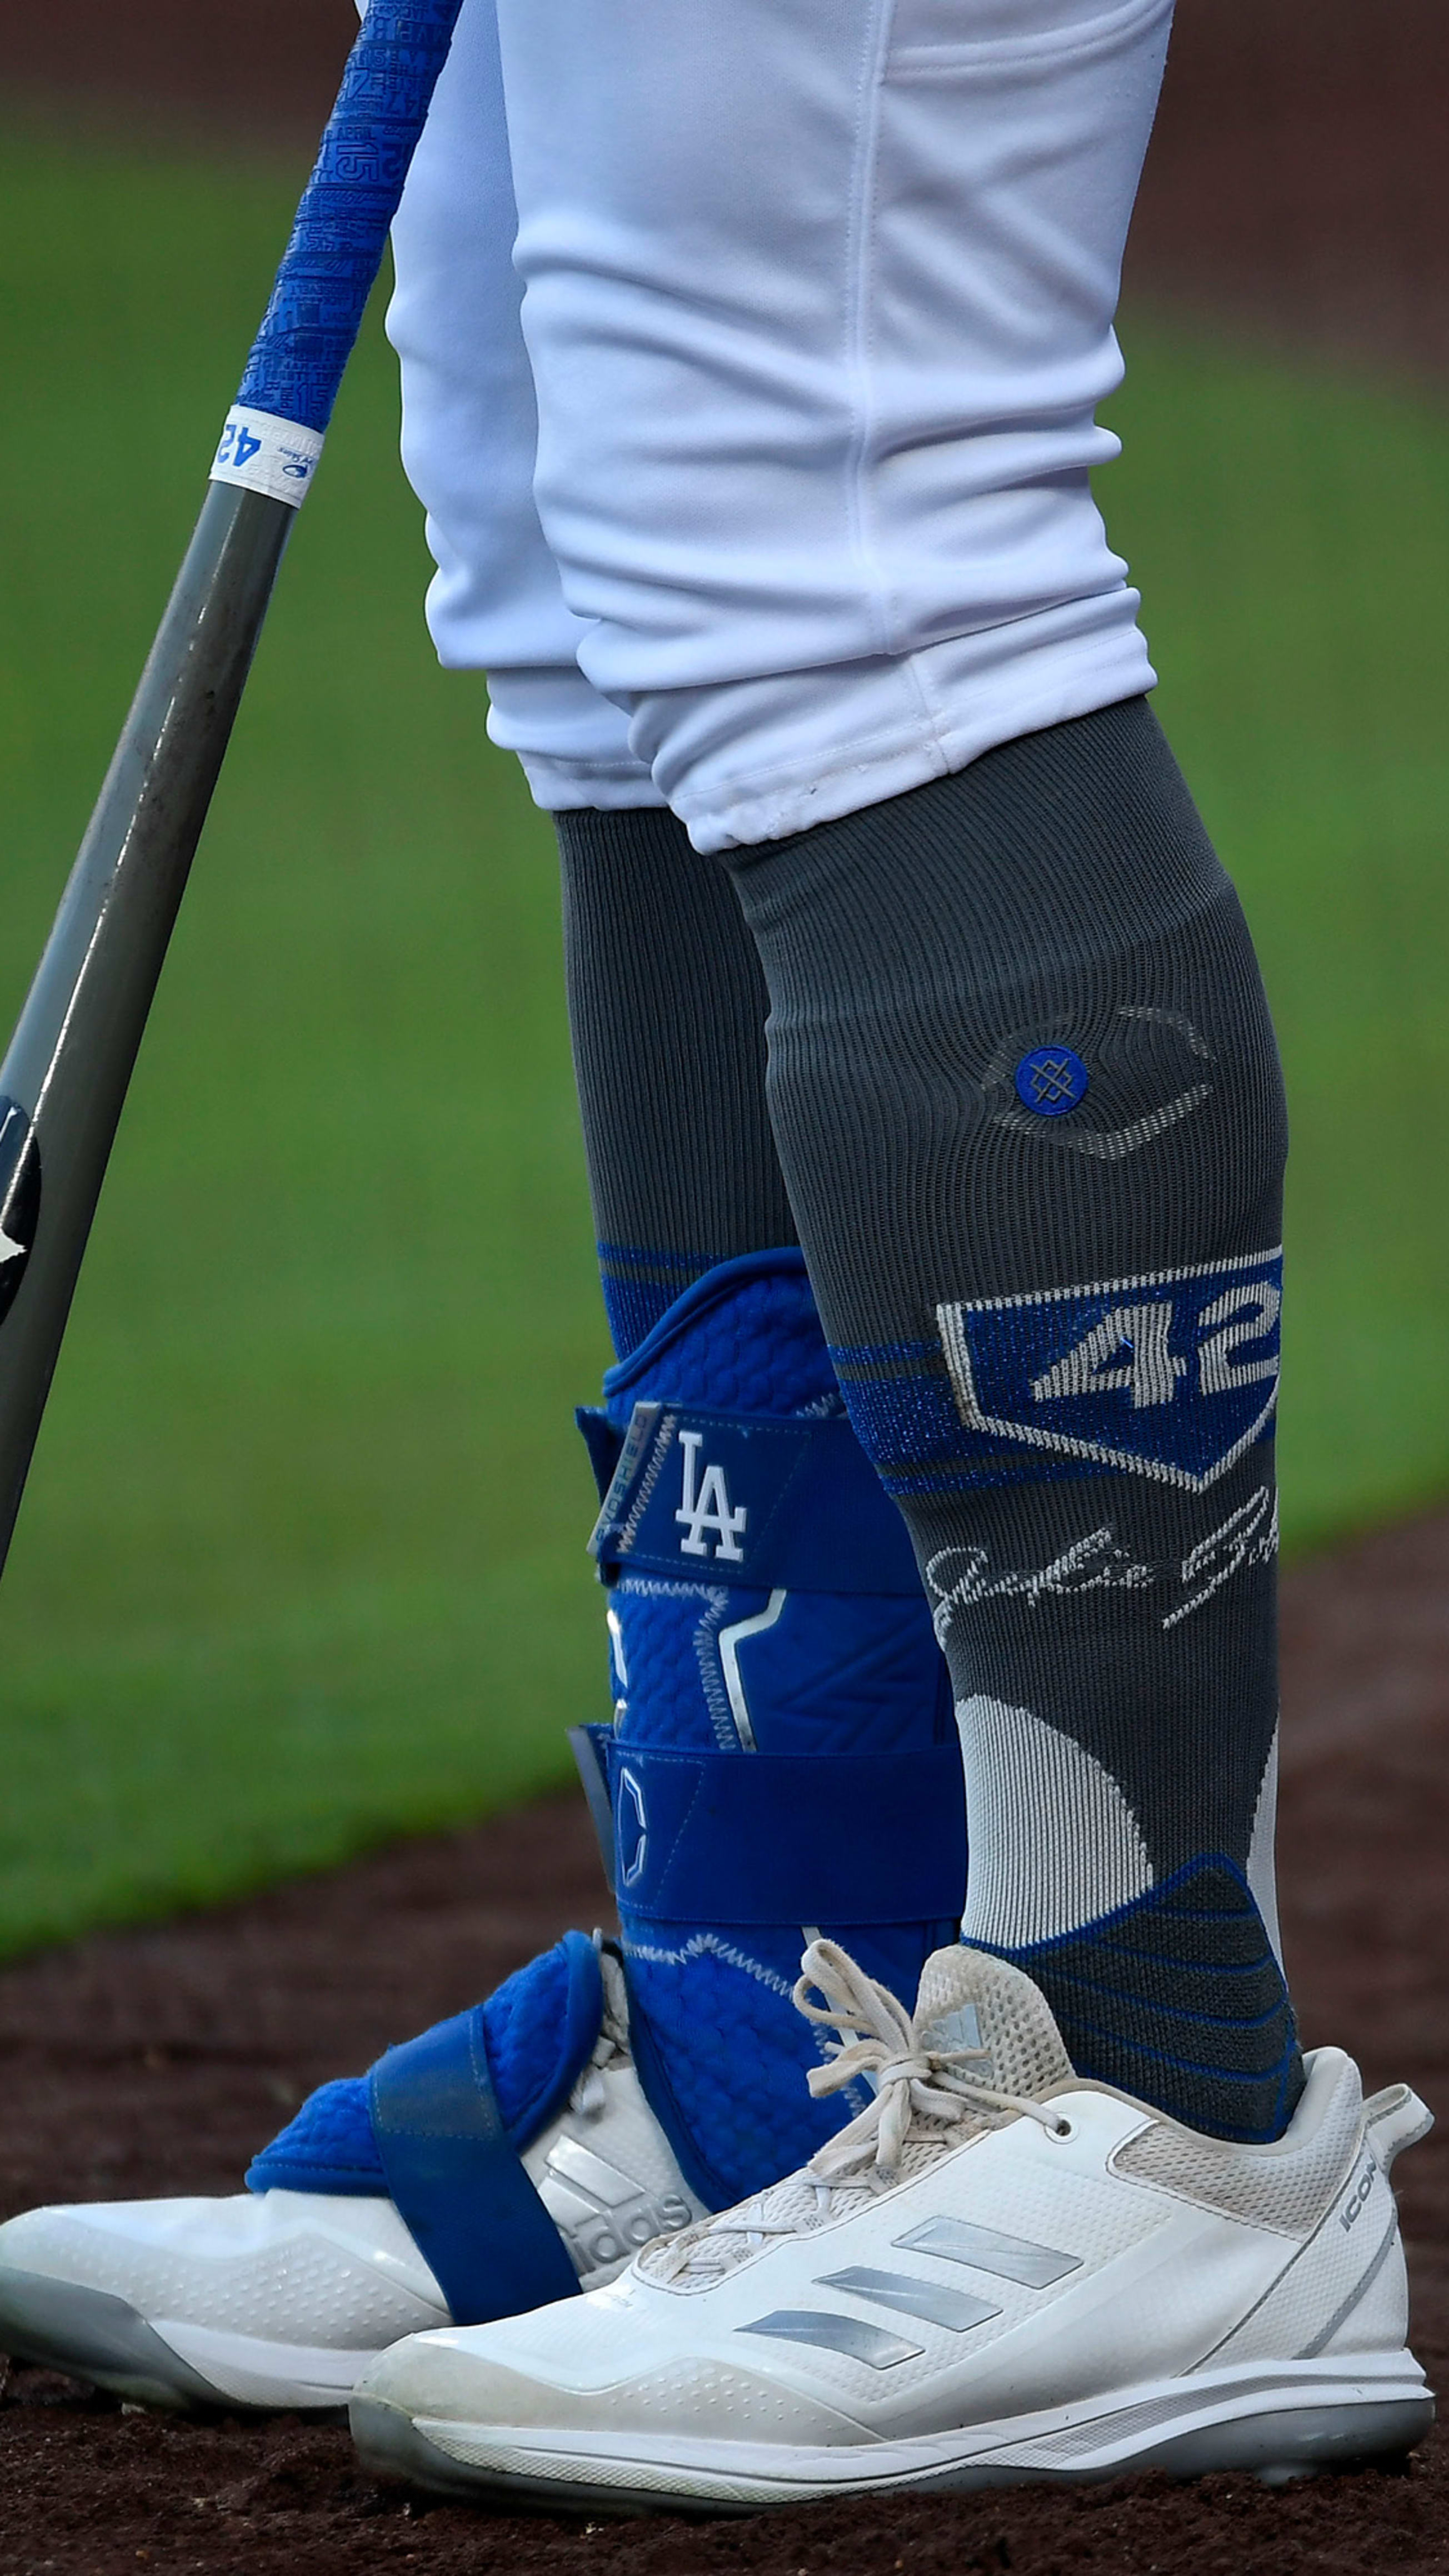 MLB Stories - MLB players' Jackie Robinson Day gear and cleats